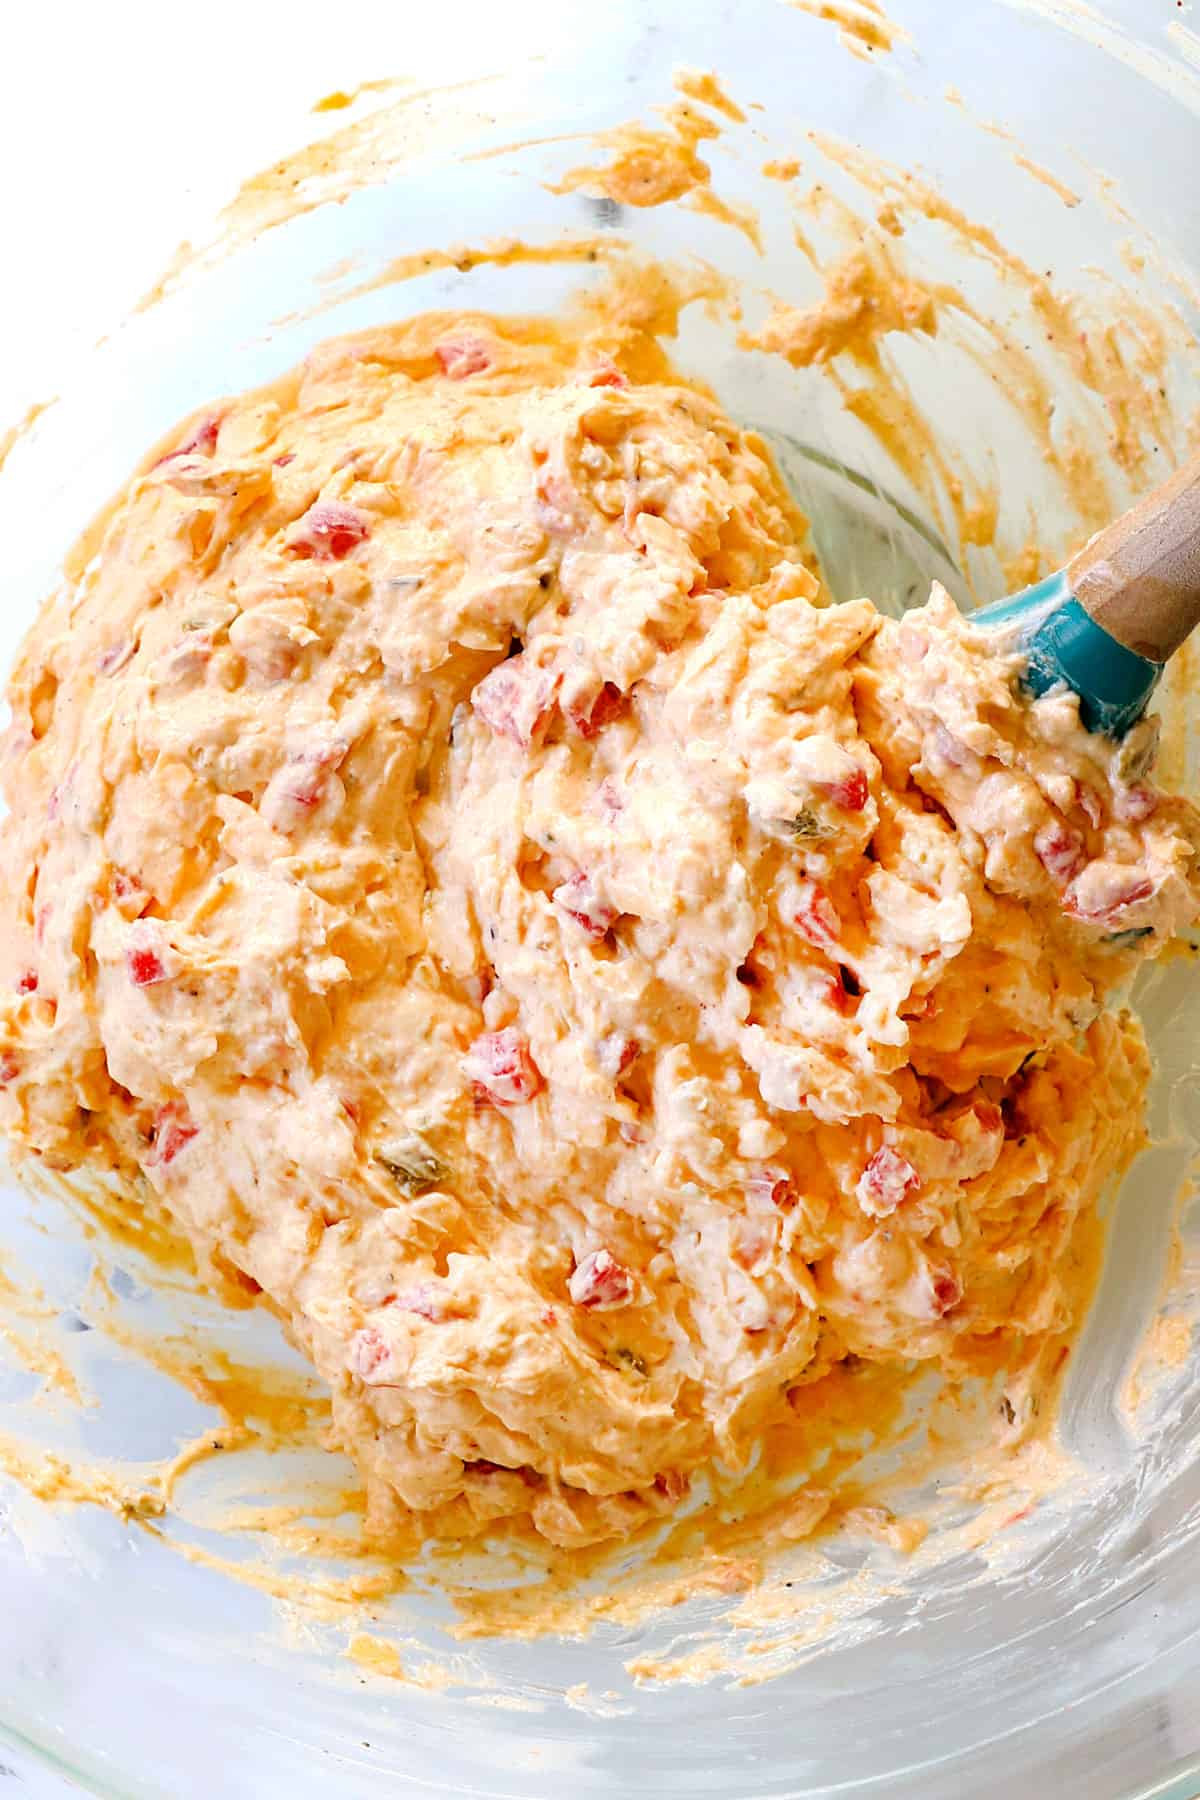 showing how to make pimento cheese recipe by mixing mayonnaise, cream cheese, cheddar and pimentos together in a glass bowl